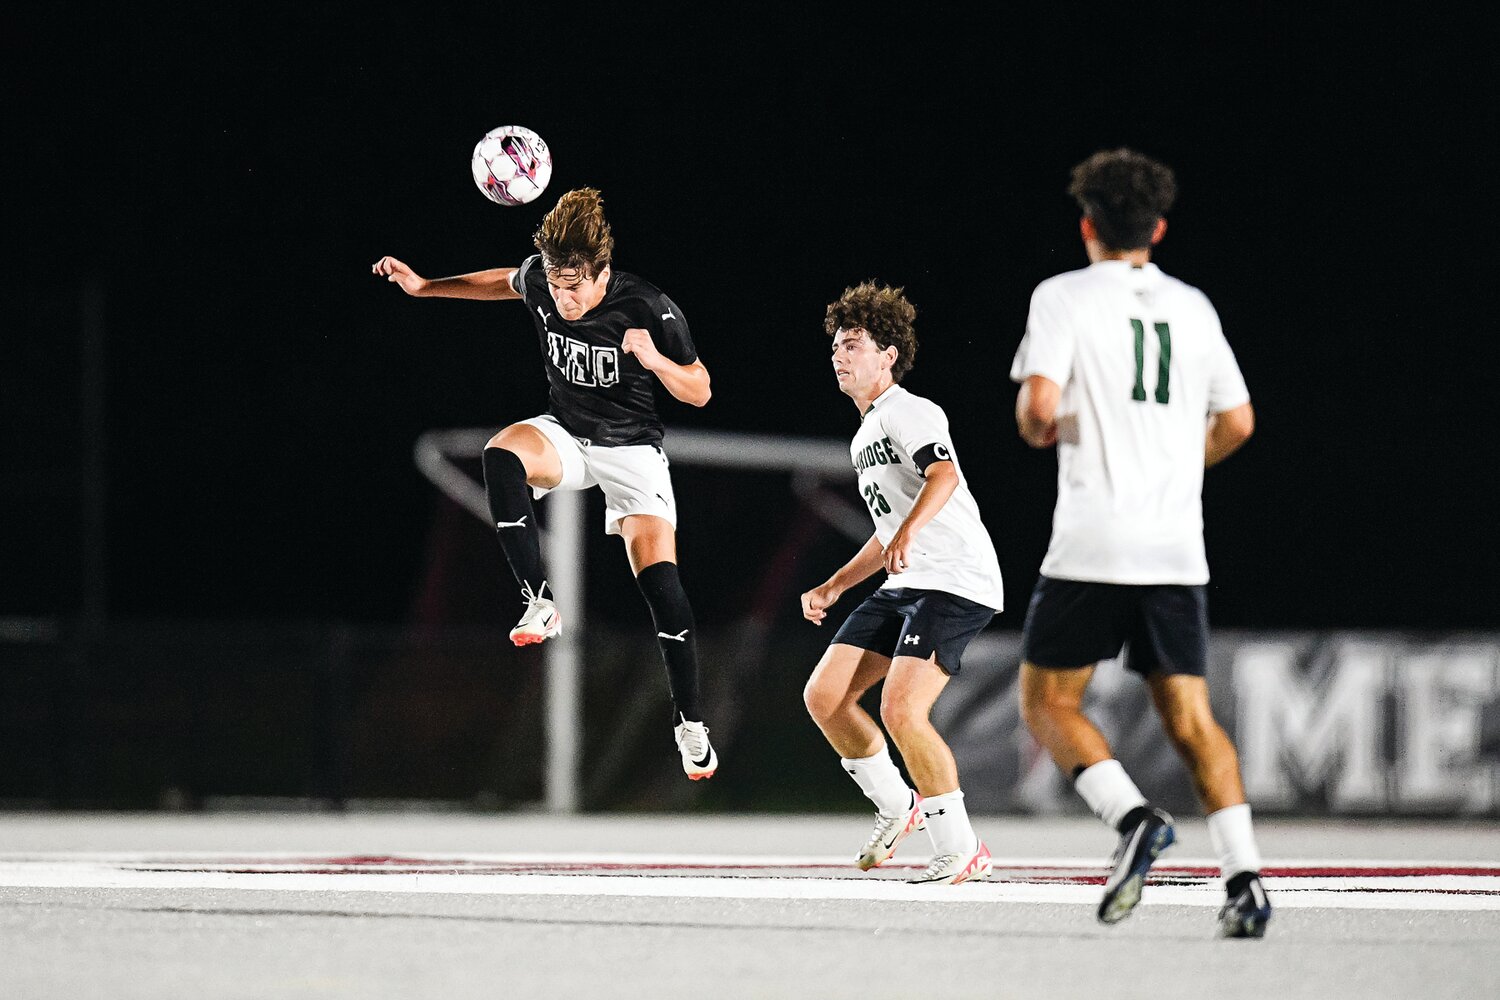 Faith Christian’s Jude Clymer clears the zone by heading the ball out ahead of Pennridge’s Patrick Fannon and Chase Rabinowitz.